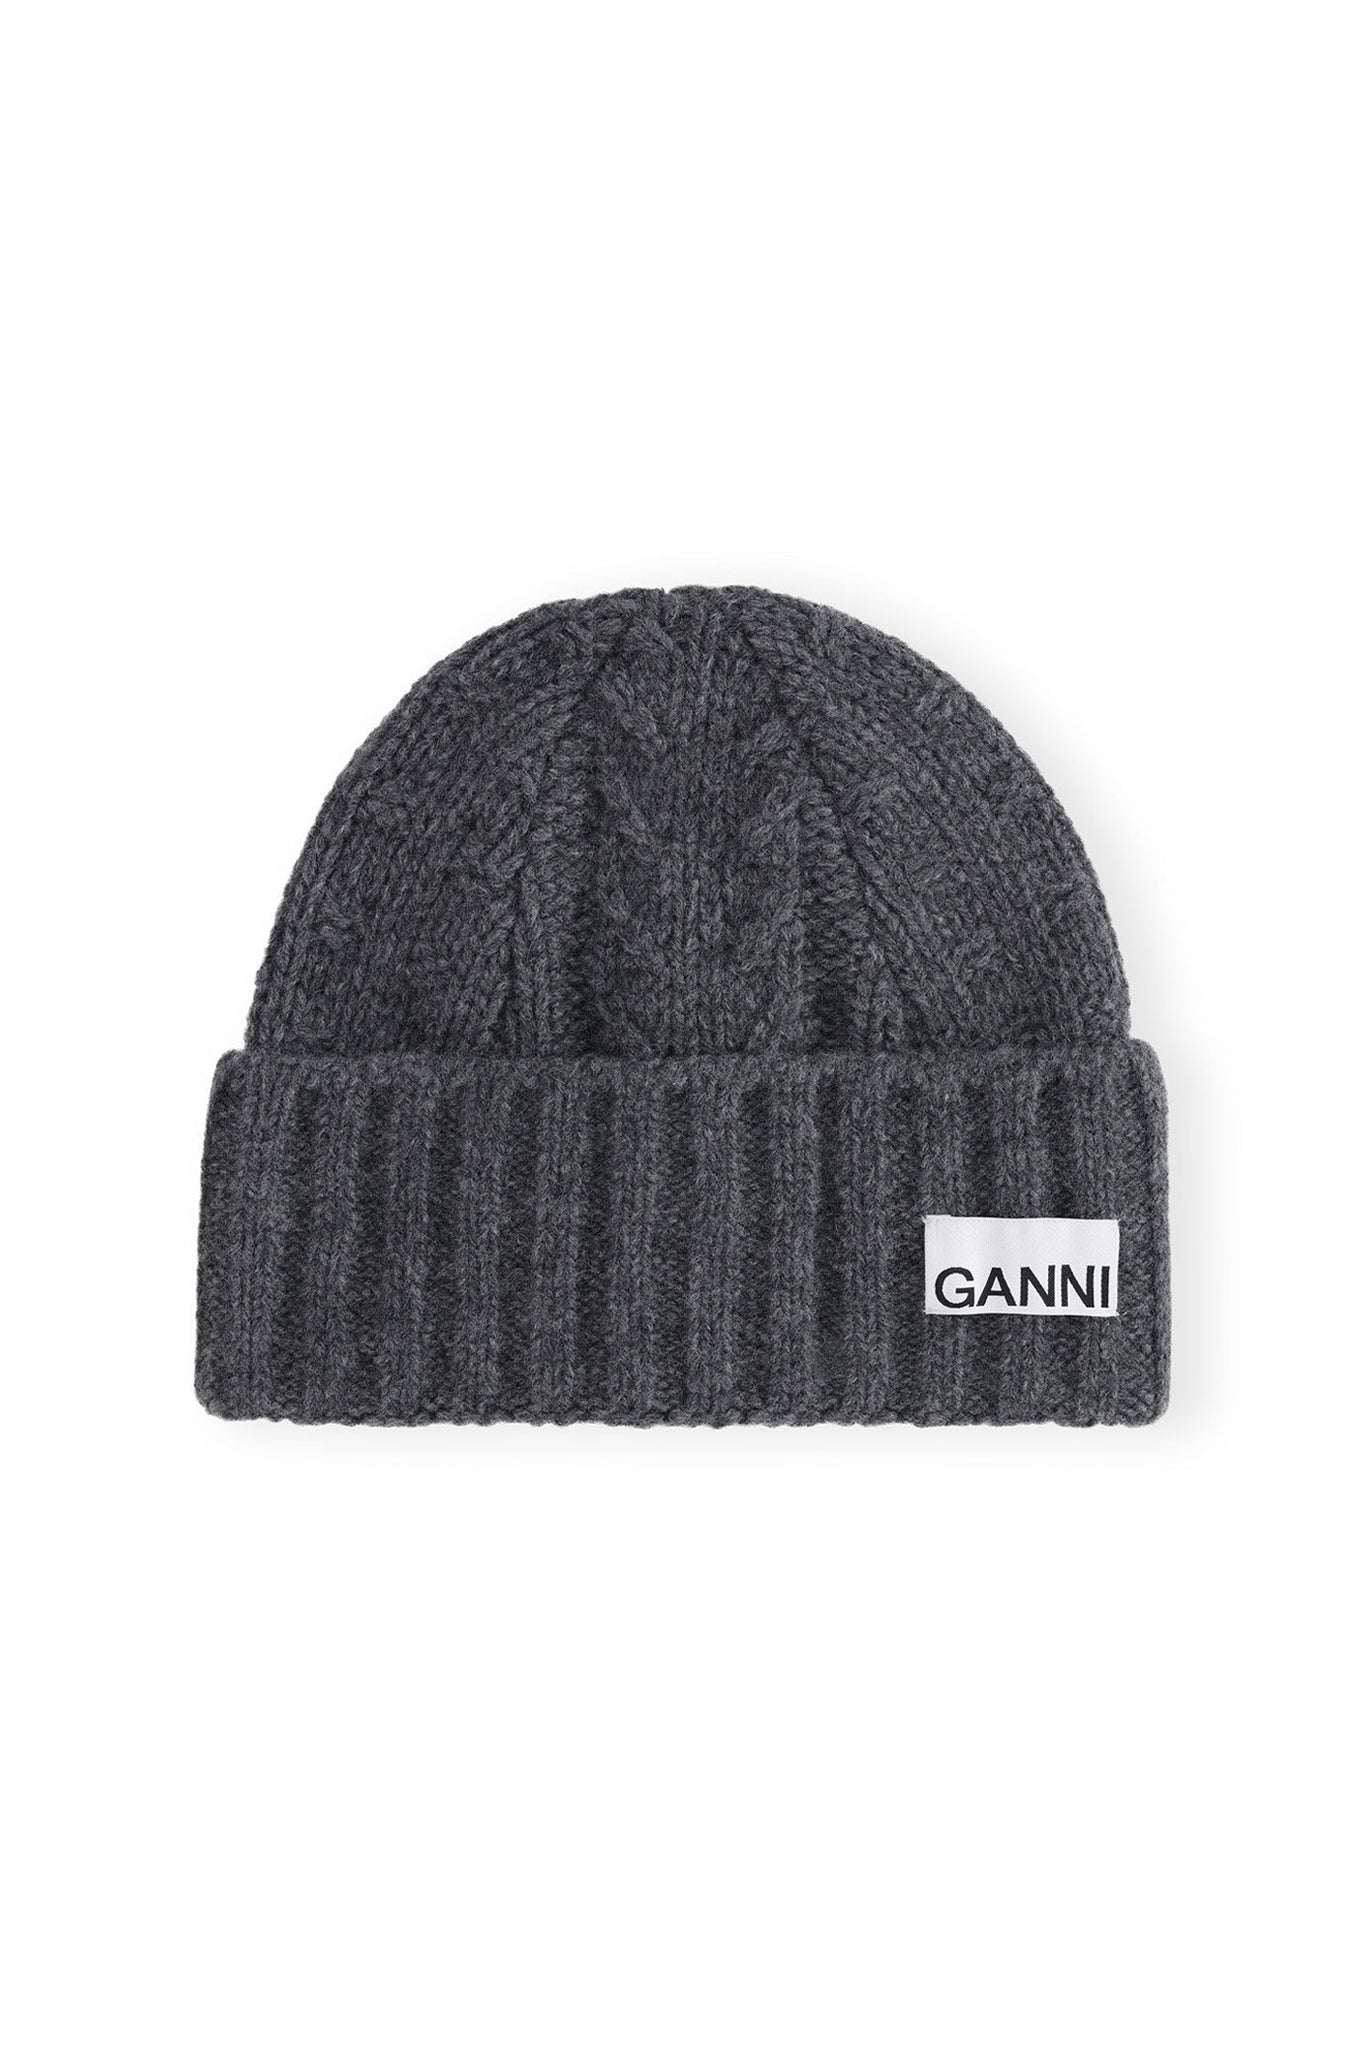    Ganni-Grey-Regular-Wool-Cable-Beanie-Frost-Gray